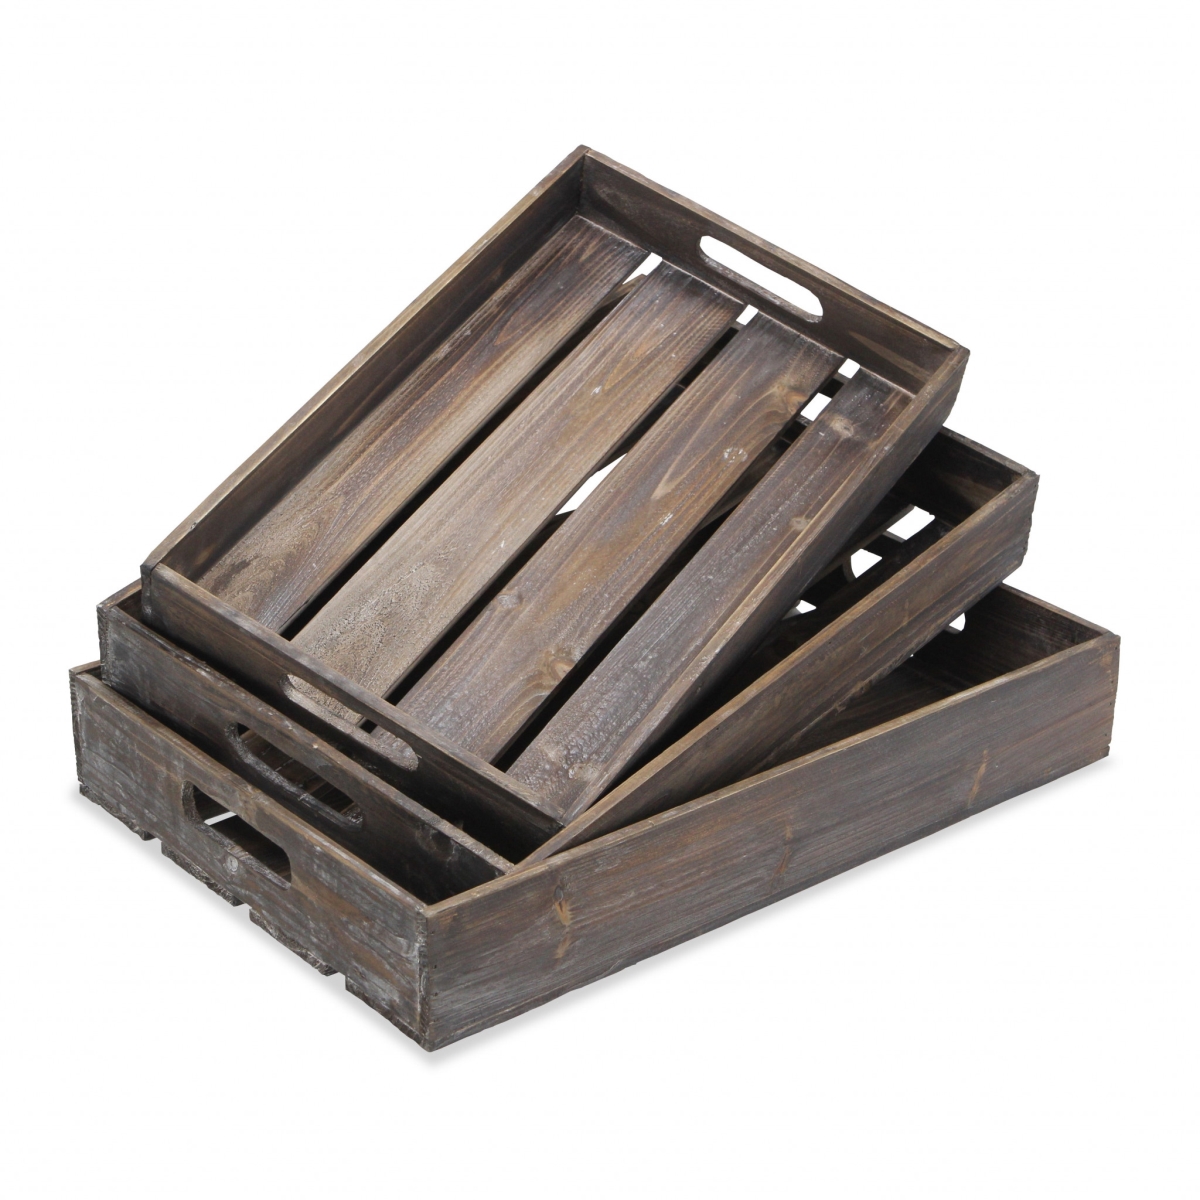 Picture of HomeRoots 483316 19 in. Rectangular Wood Handmade Tray with Handles, Brown